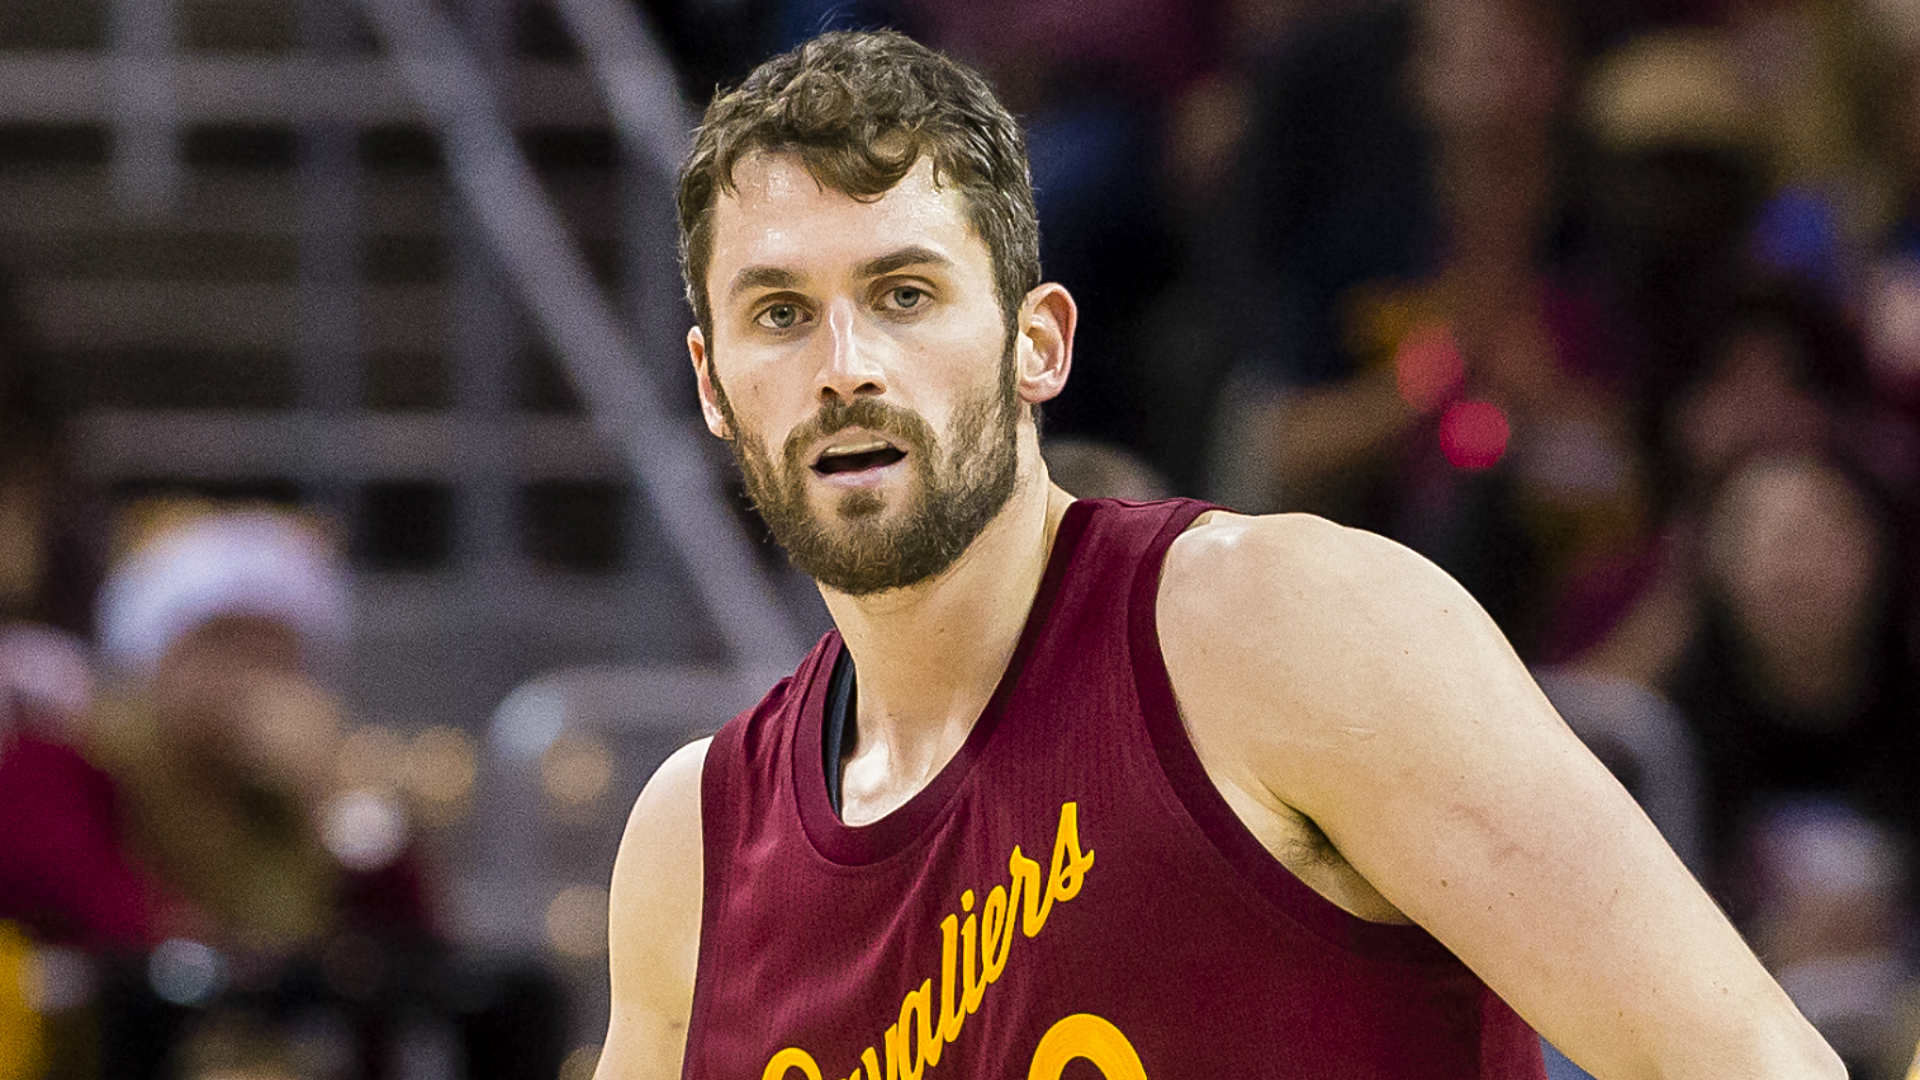 Kevin Love detailed how he had a panic attack during the Cleveland Cavaliers' NBA game against the Atlanta Hawks in November last year.